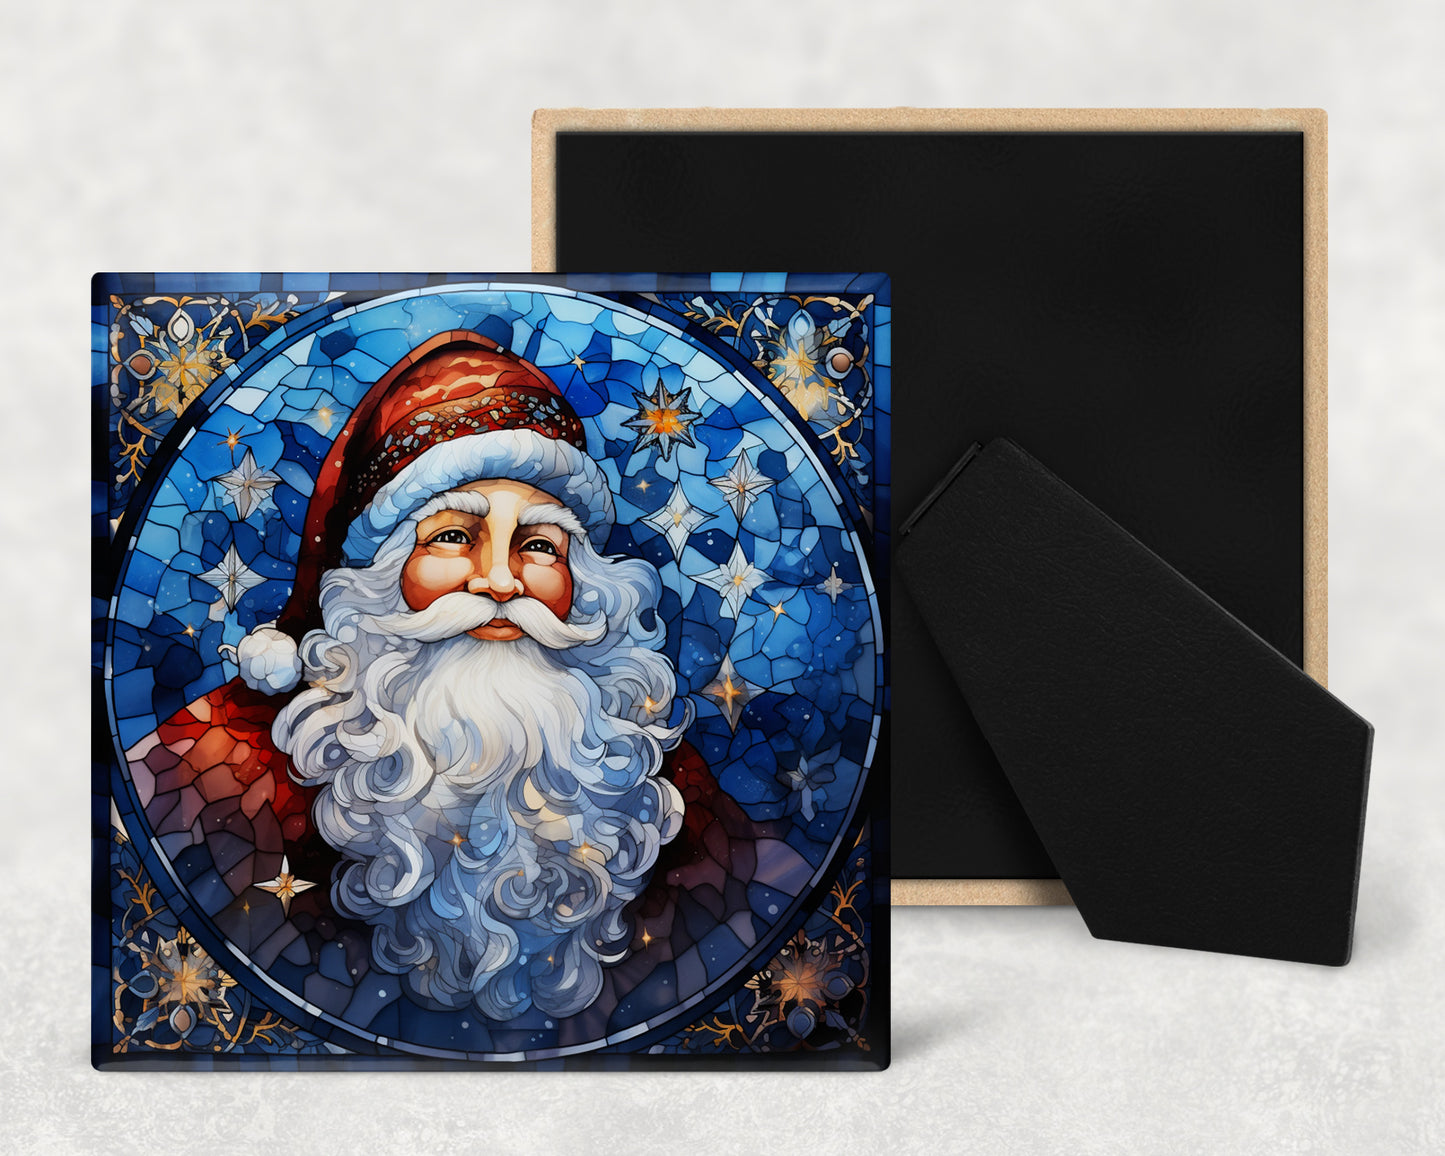 Stained Glass Santa Art Decorative Ceramic Tile with Optional Easel Back - Available in 3 Size